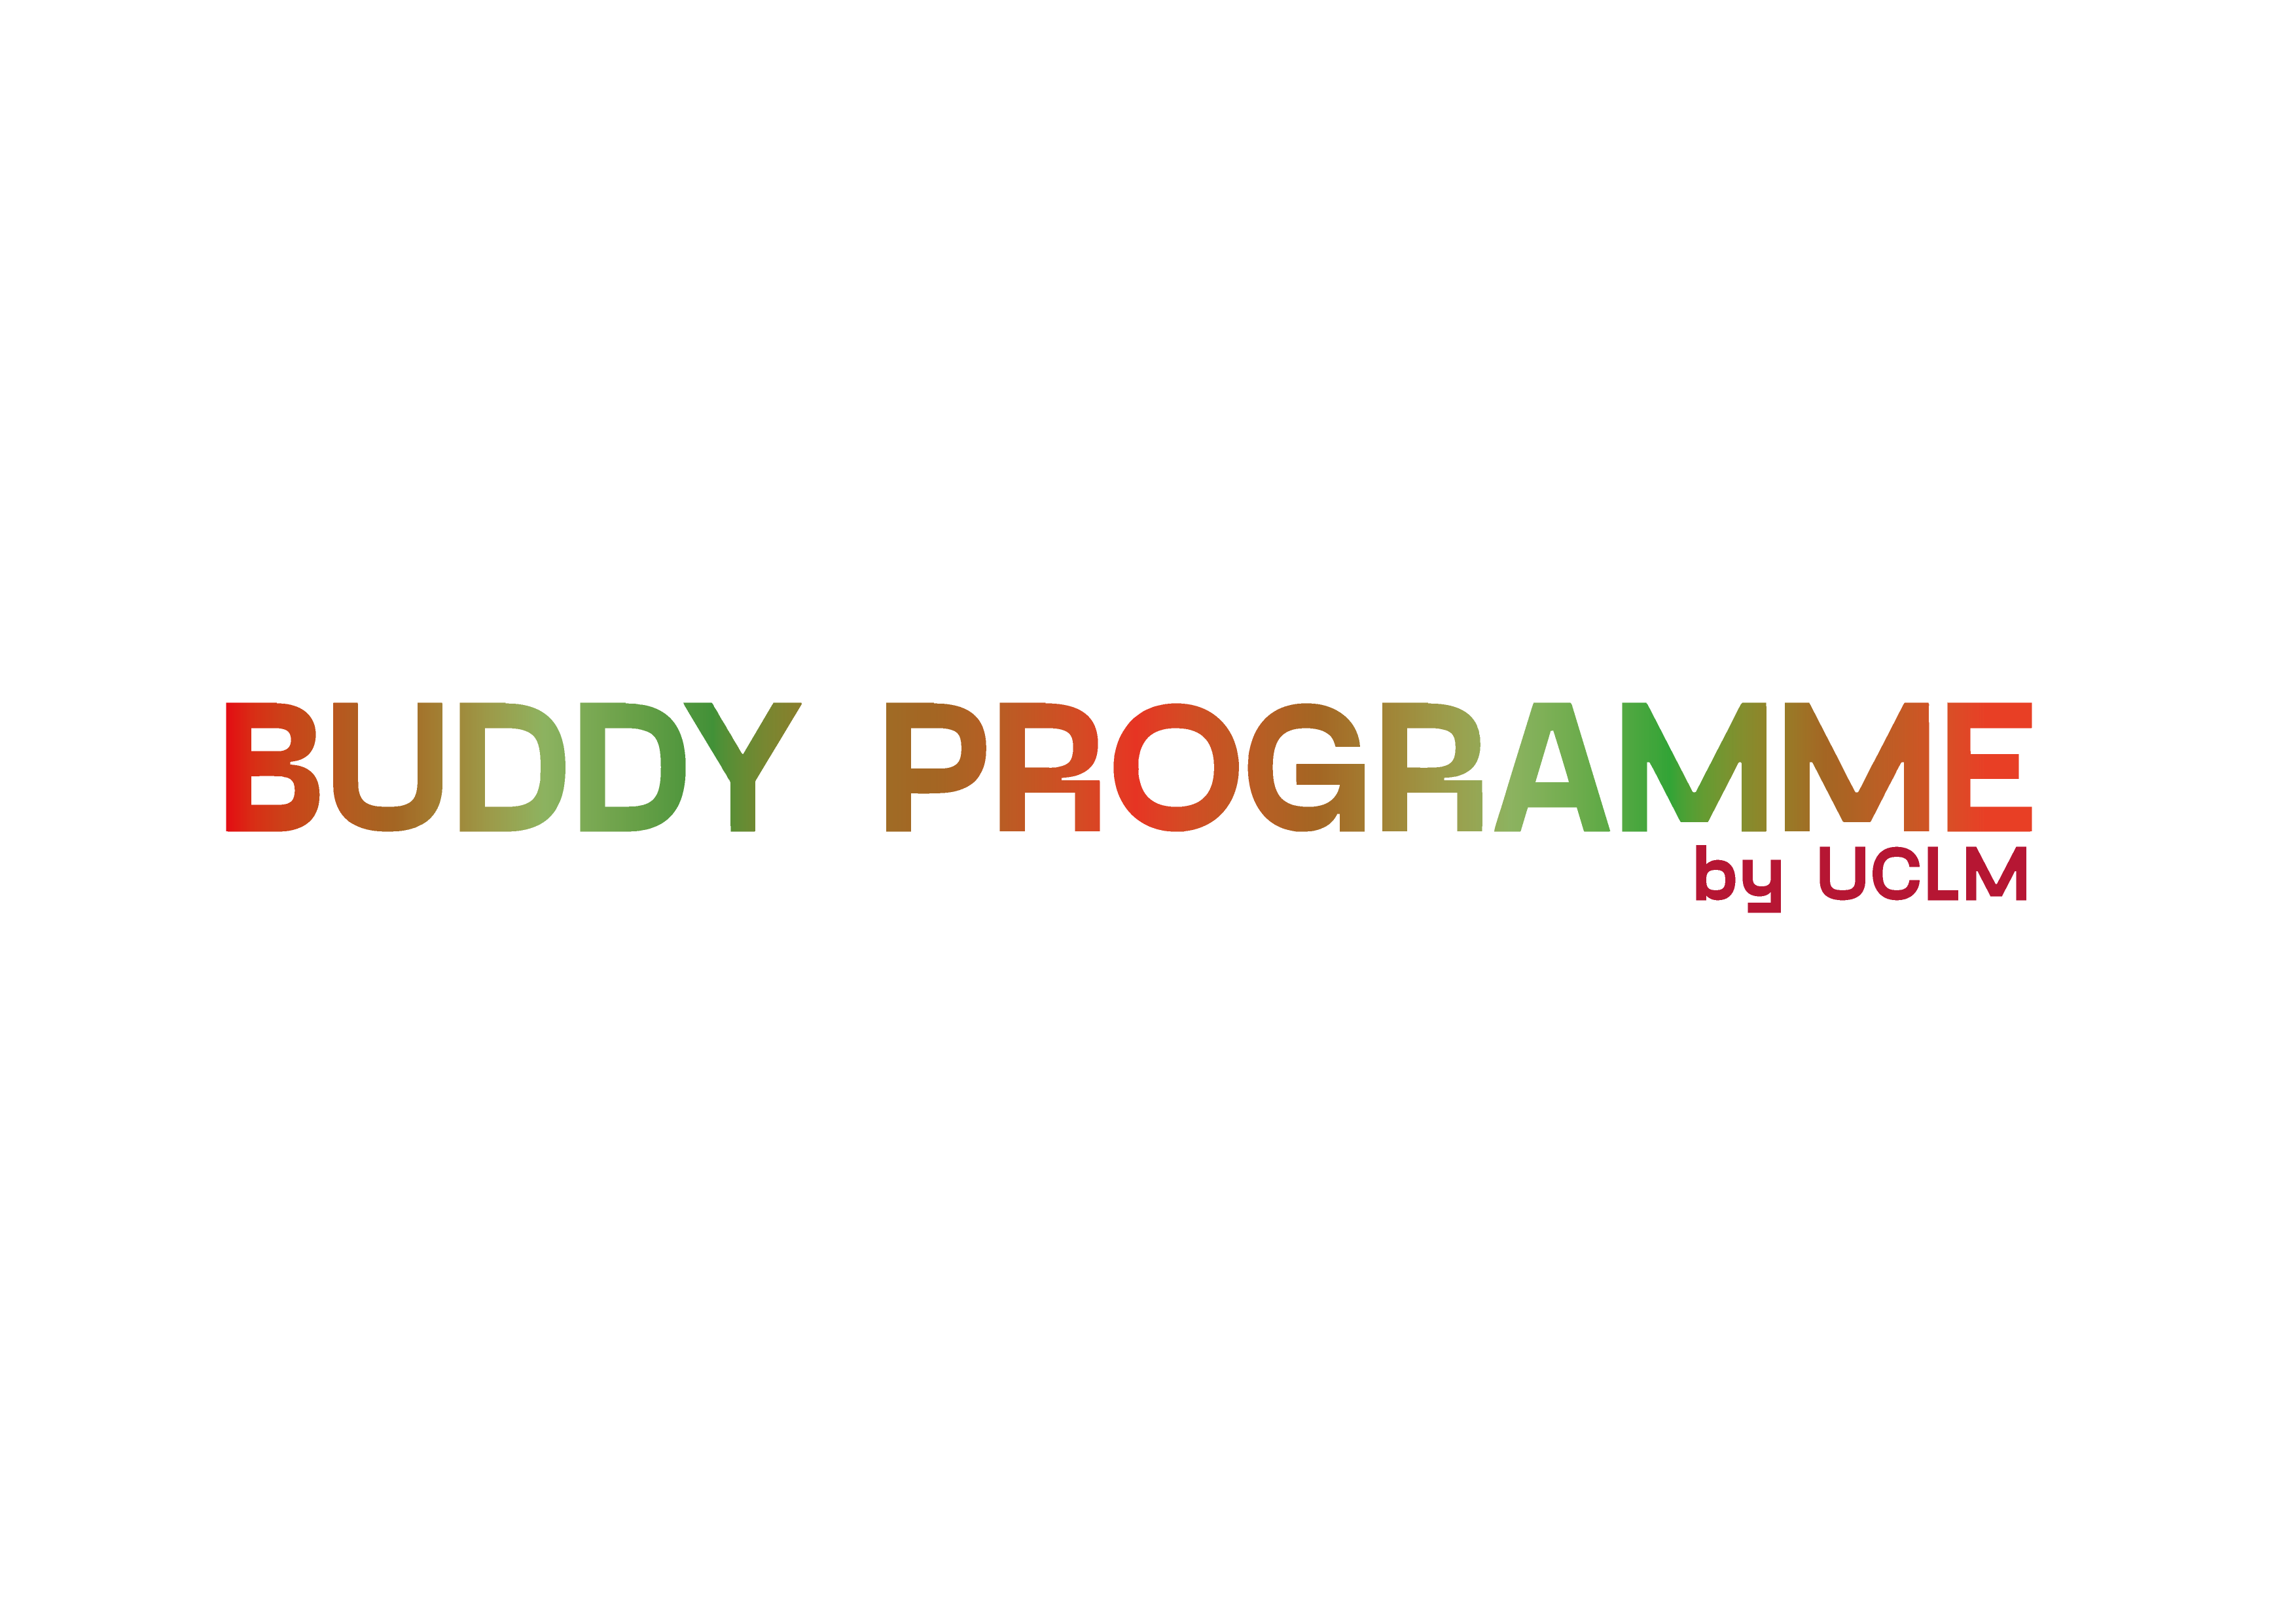 Buddy Programme by UCLM